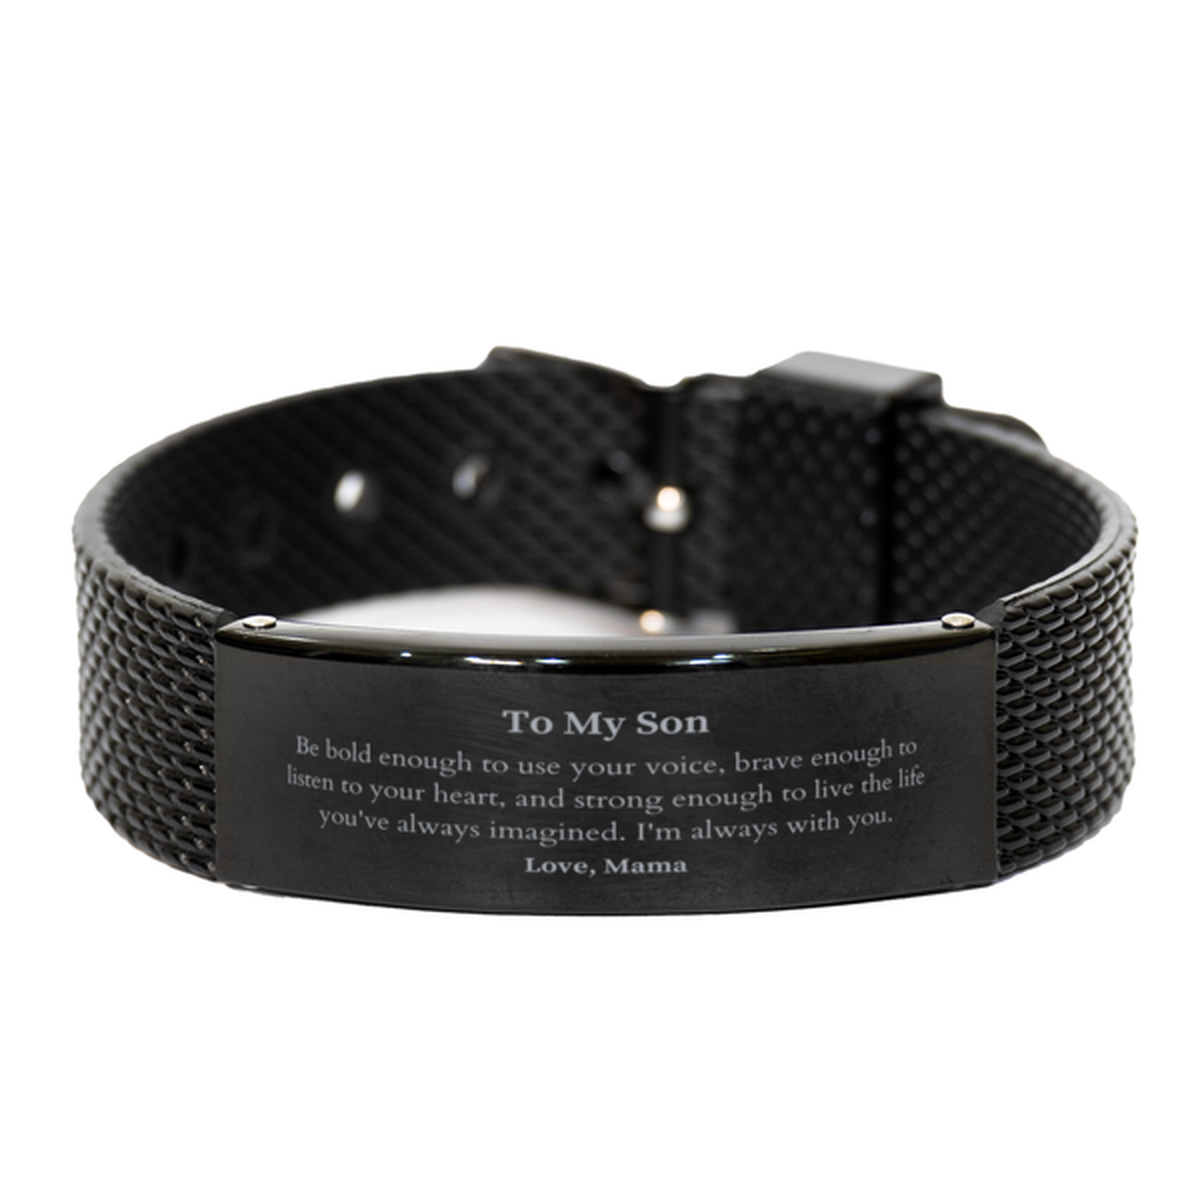 Keepsake Son Black Shark Mesh Bracelet Gift Idea Graduation Christmas Birthday Son from Mama, Son Be bold enough to use your voice, brave enough to listen to your heart. Love, Mama